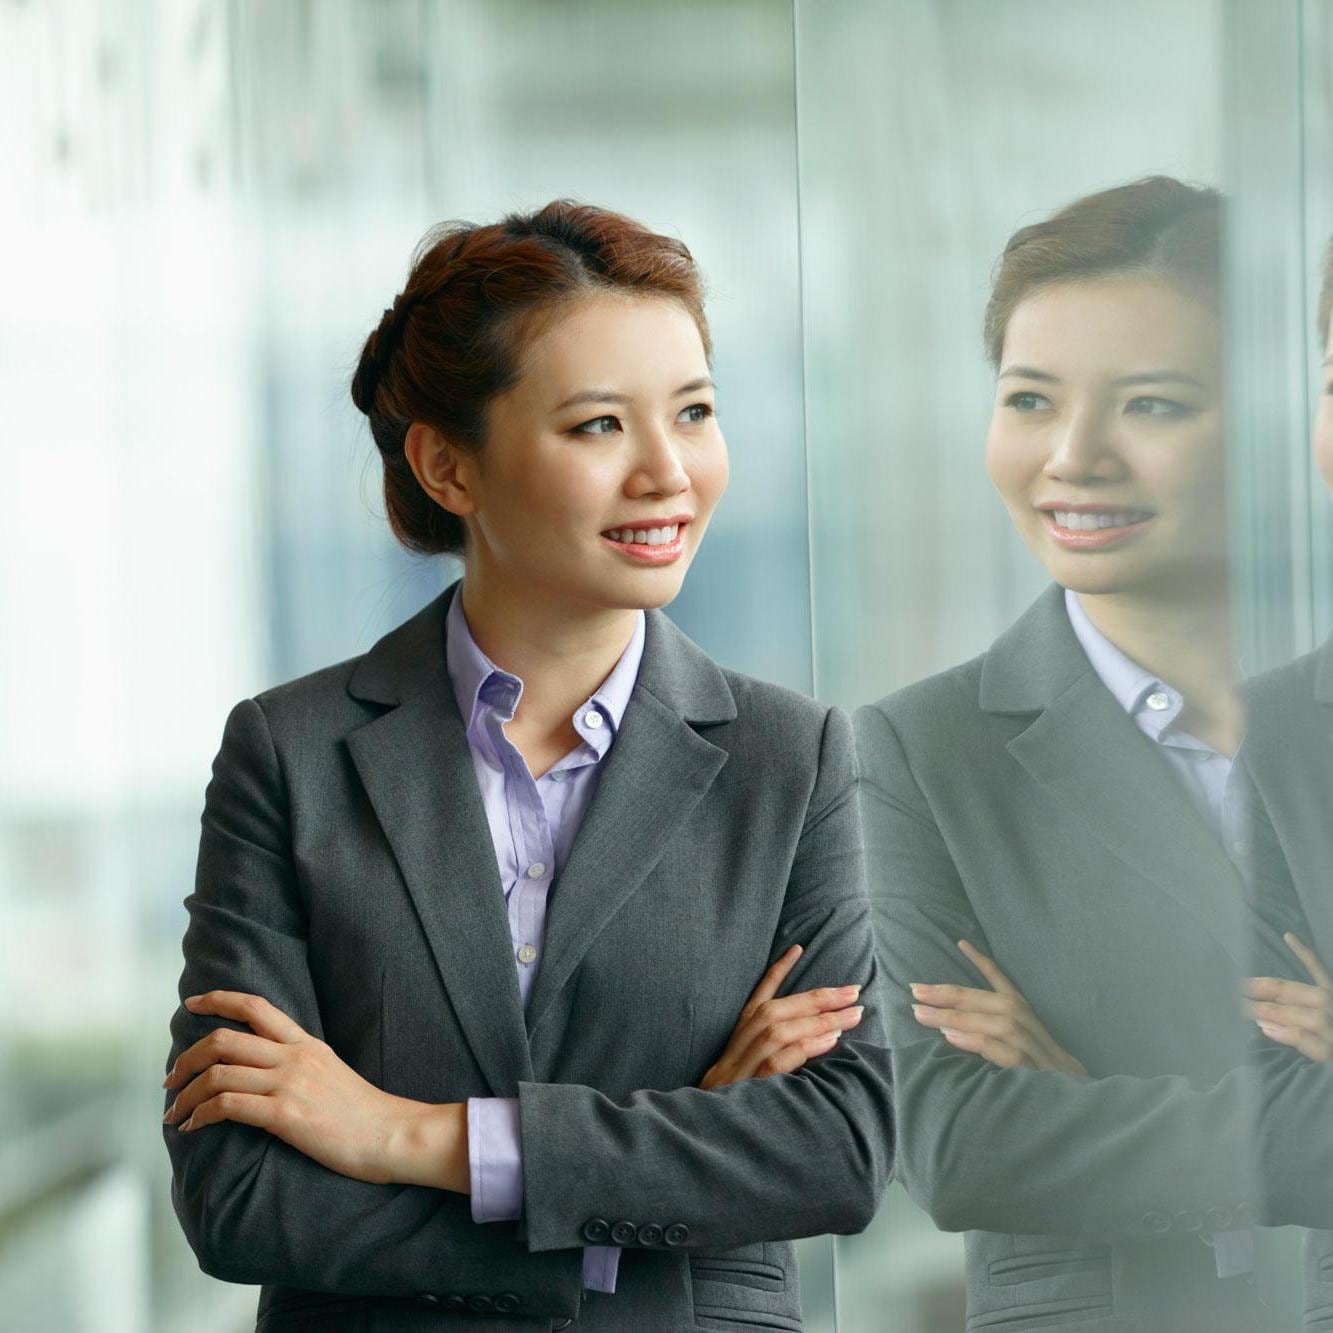 Business woman looking at her reflection 